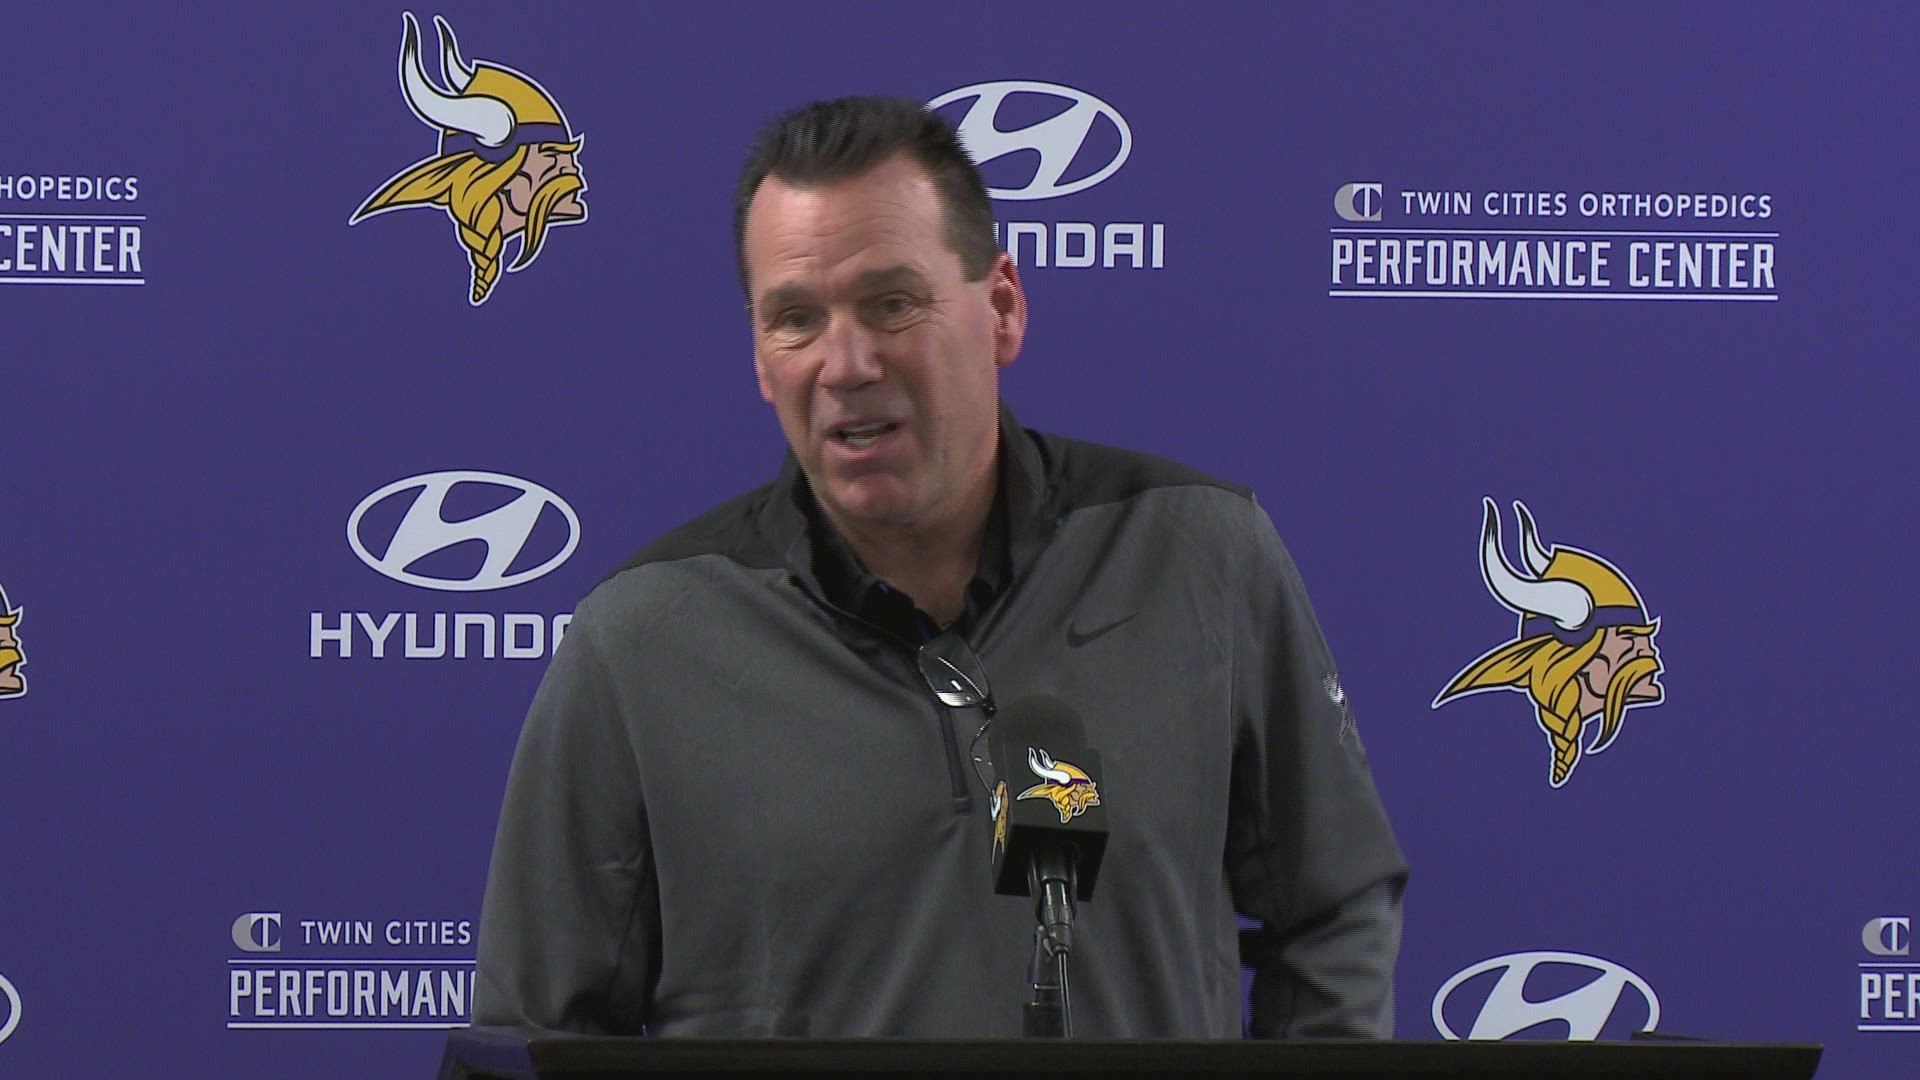 Kubiak believes that with the new offensive coaching staff it, "gives us the opportunity to do something quickly." Hear more from the new Vikings coach on how he plans to impact the Vikings offense.